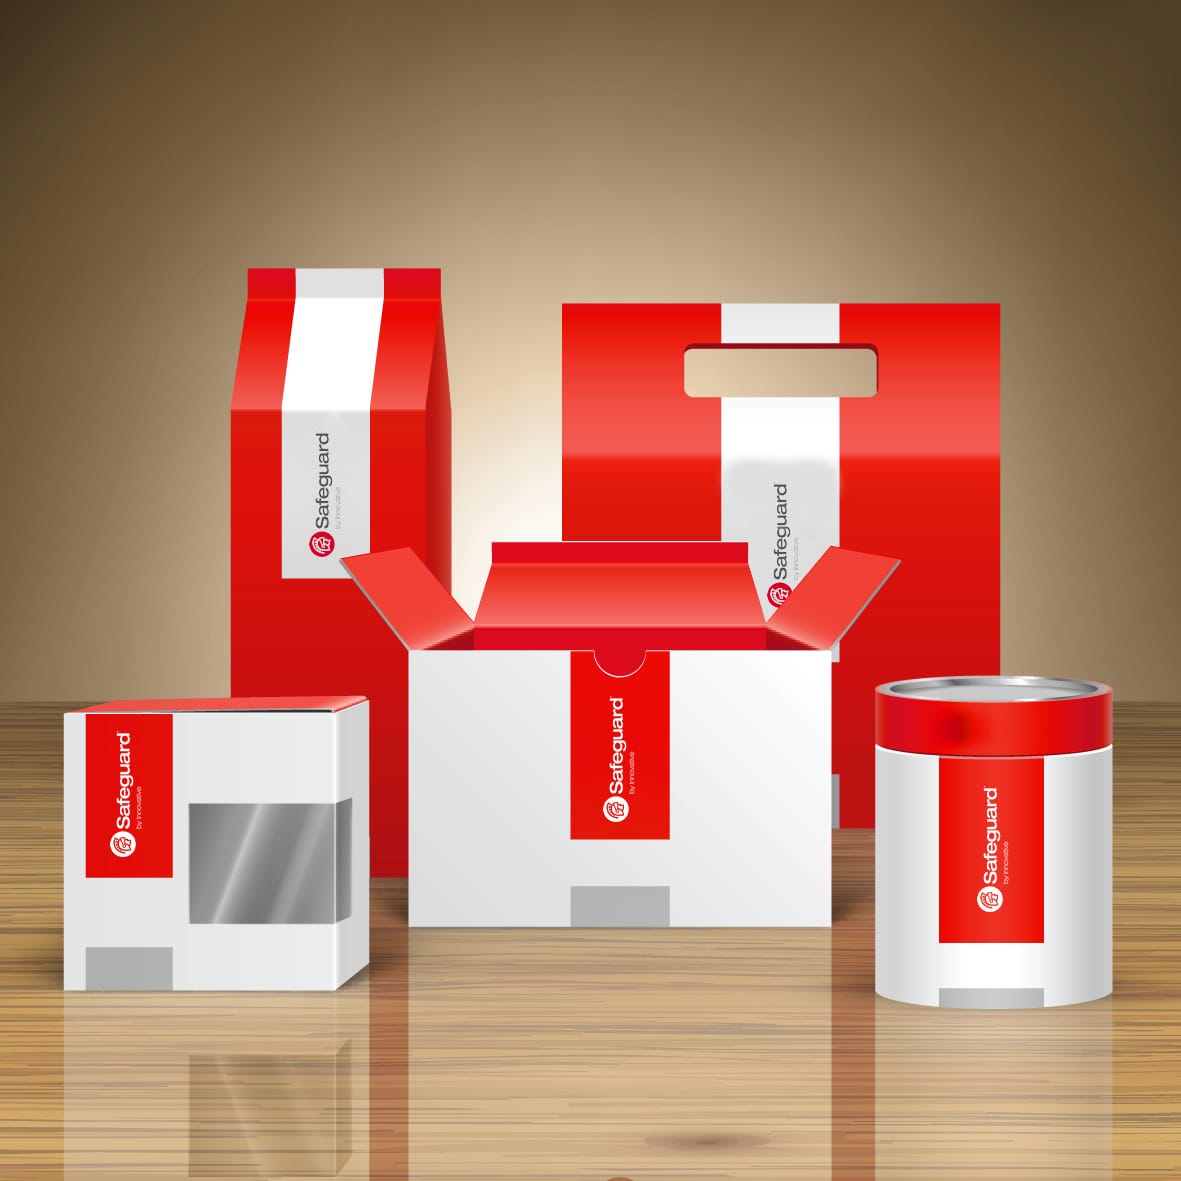 Safeguard-branded boxes and storage containers of varying styles and sizes.